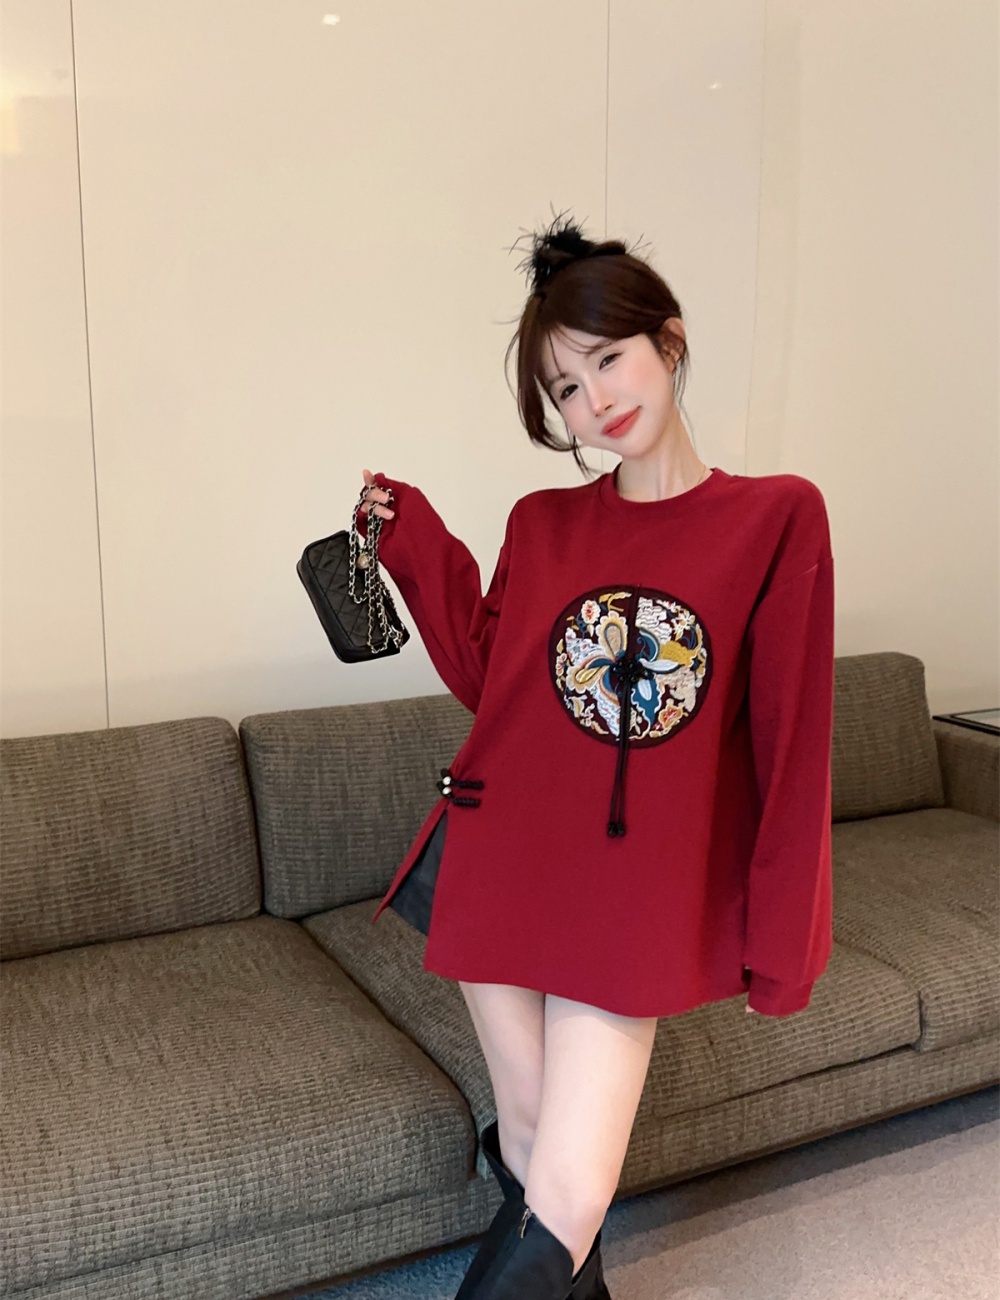 Long sleeve Chinese style tops frenum spring T-shirt for women